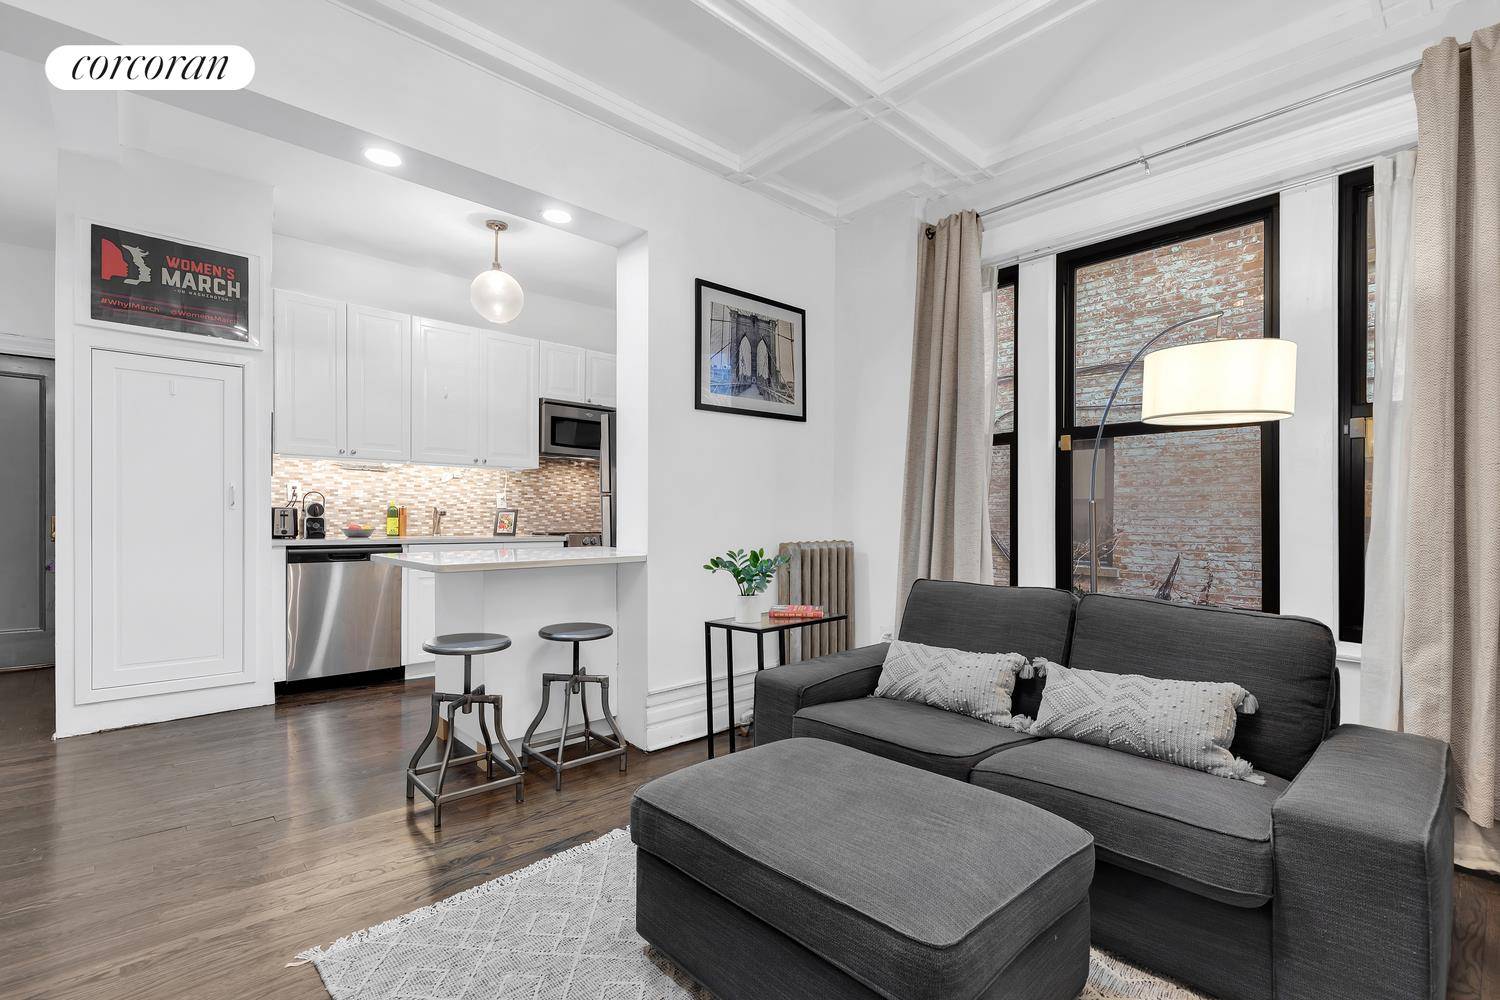 Please Note This Sunday's Open House Is By AppointmentWelcome to 147 Prospect Park Southwest Unit 3, where prewar elegance meets modern convenience in the heart of Windsor Terrace !